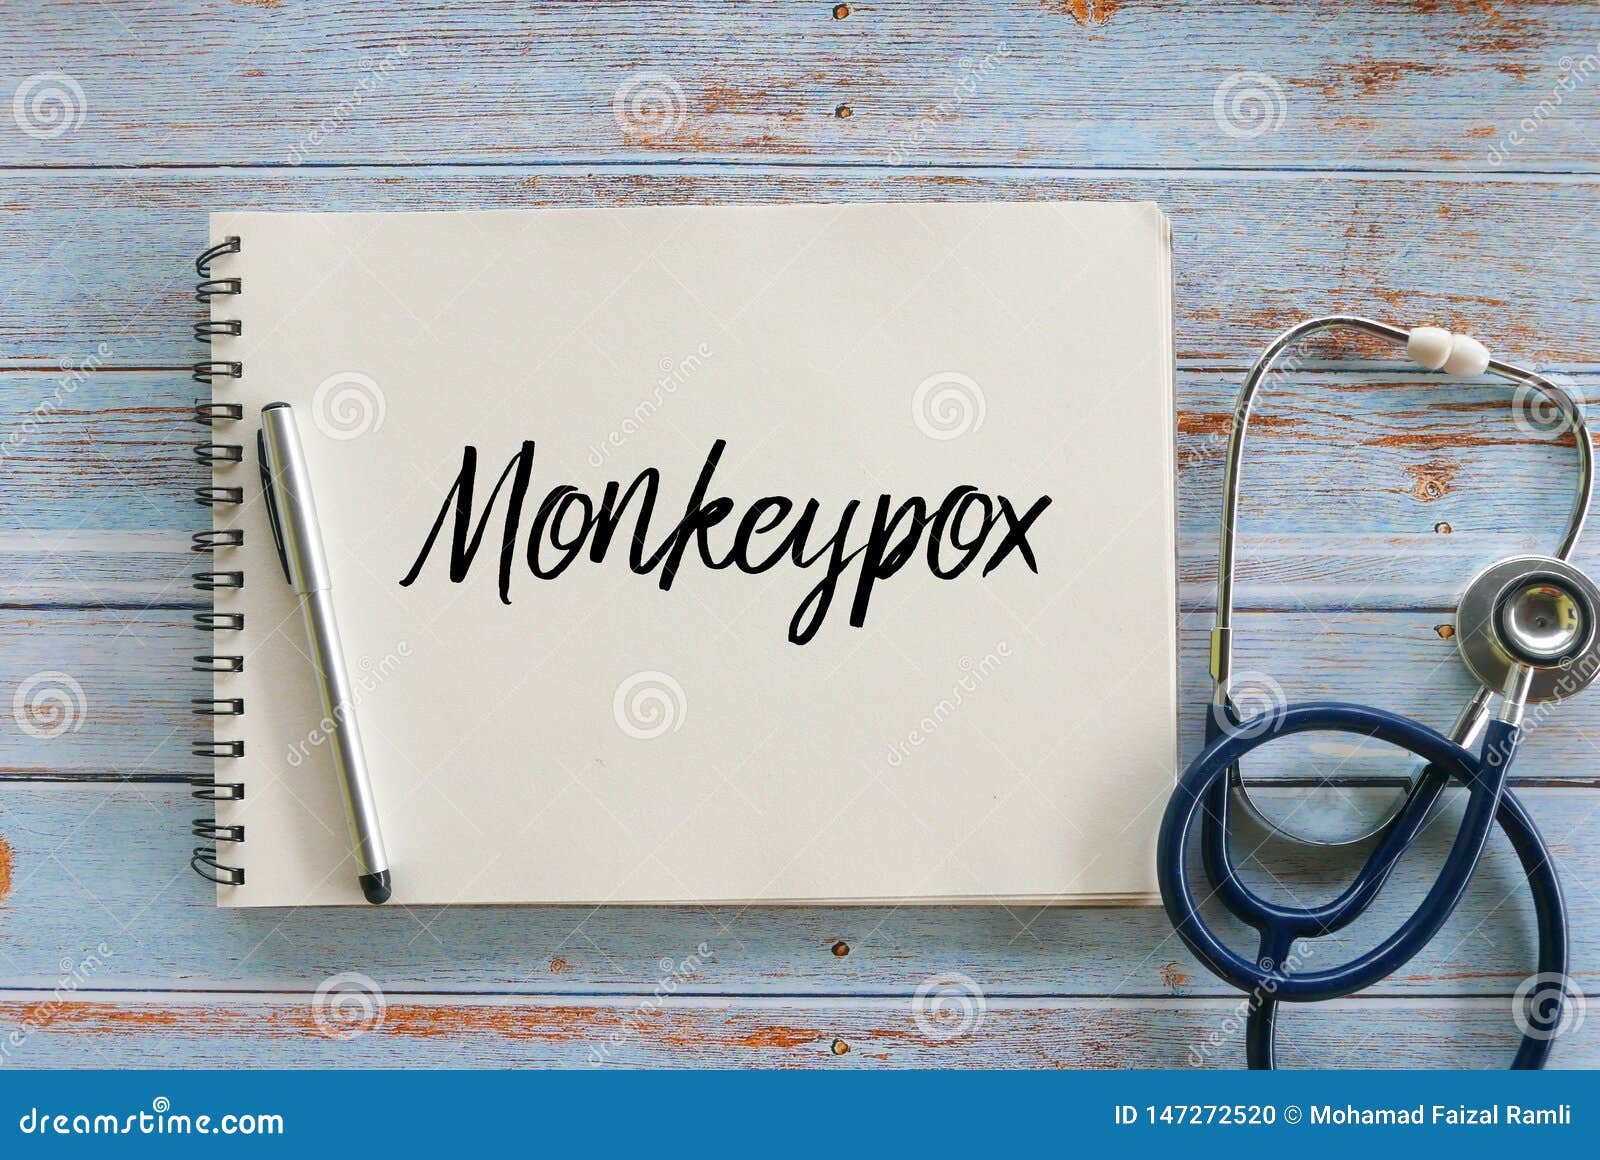 top view of pen,stethoscope and notebook written with monkeypox